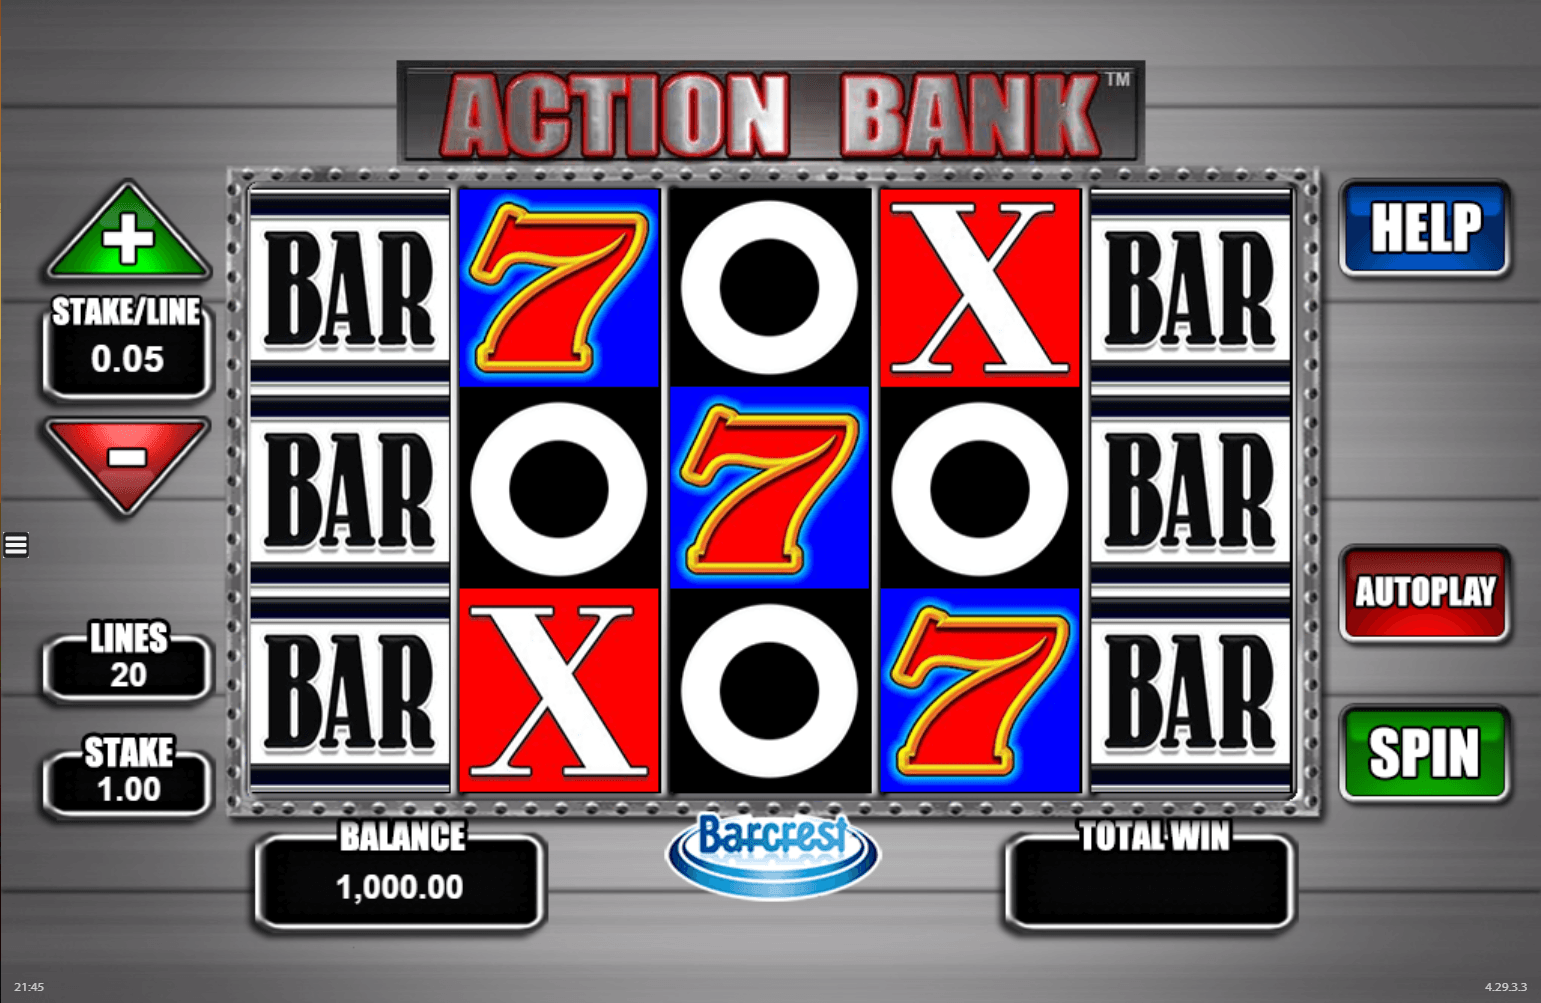 RISKING IT ALL On Action Bank Ultra Premium Red Bags! - £500 Slot Action With Mini-Bucket!